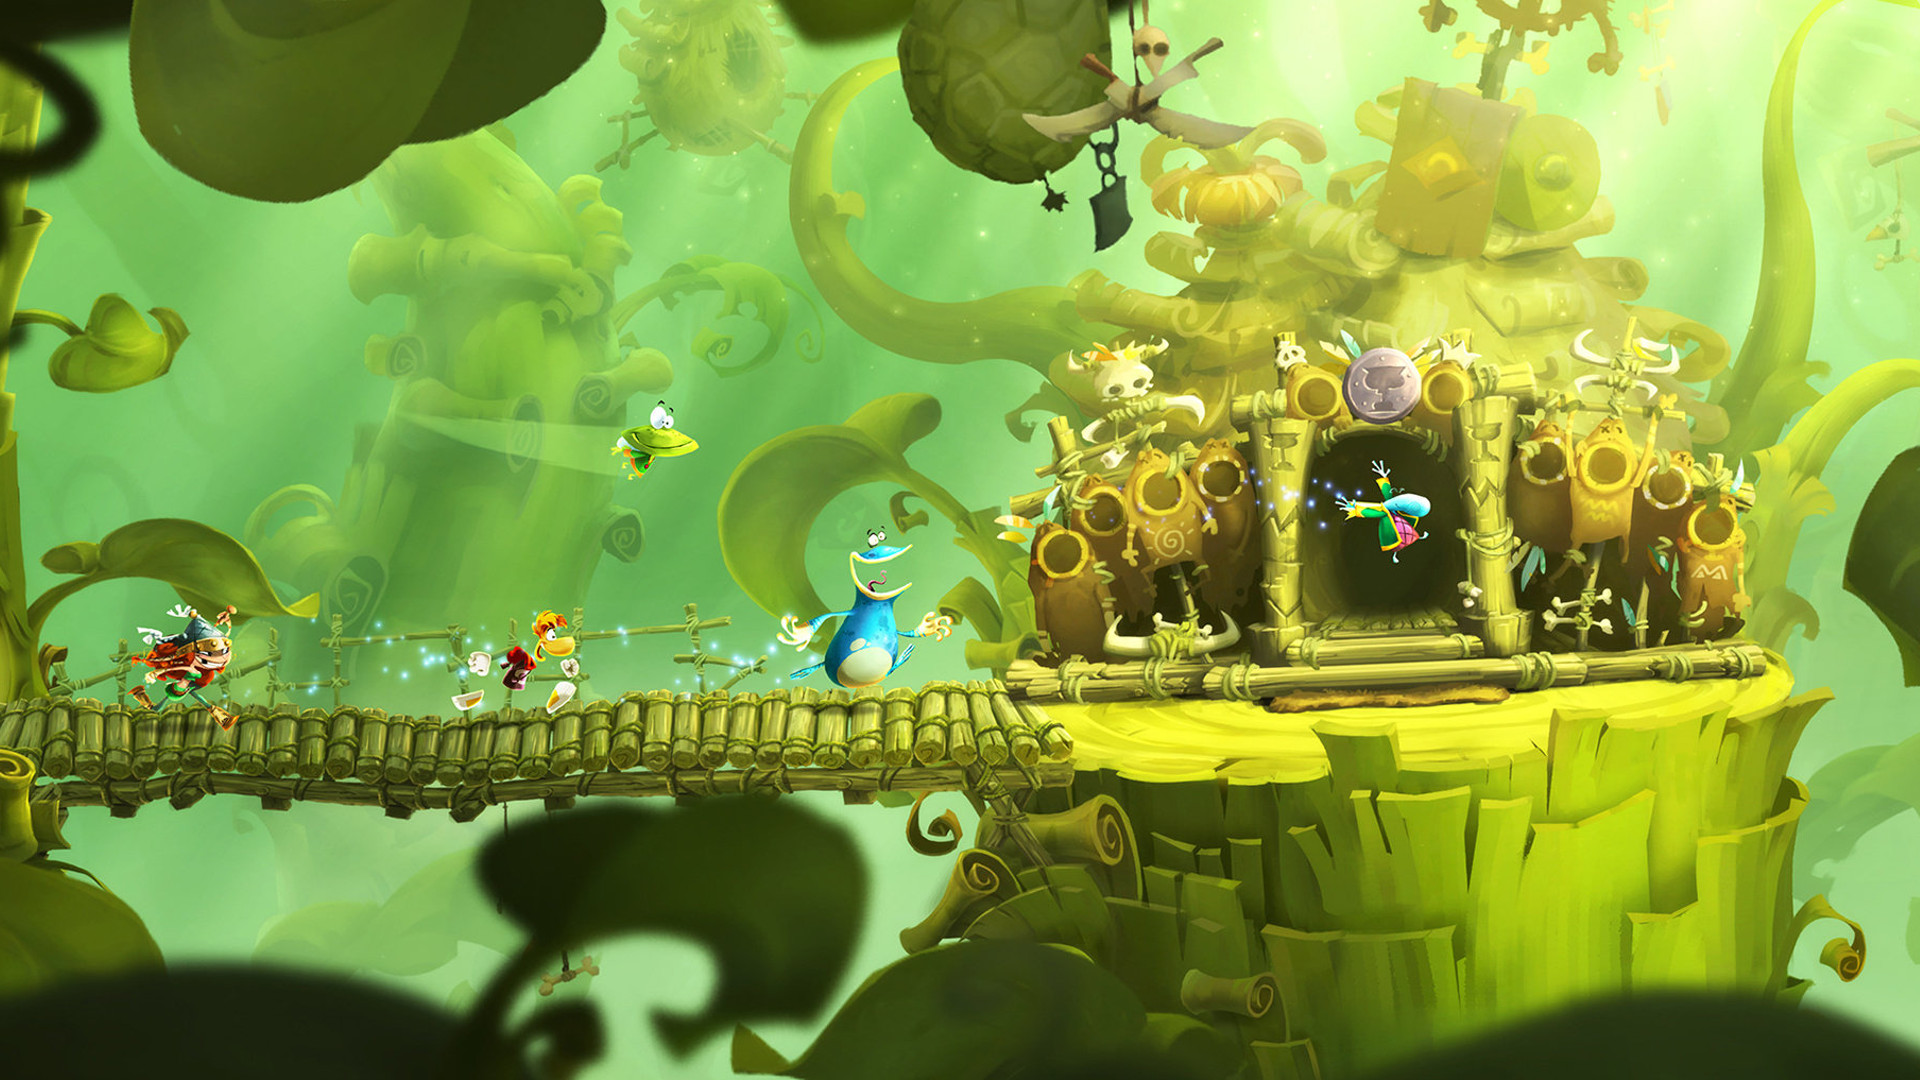 Rayman Legends - Gameplay #1 - High quality stream and download - Gamersyde